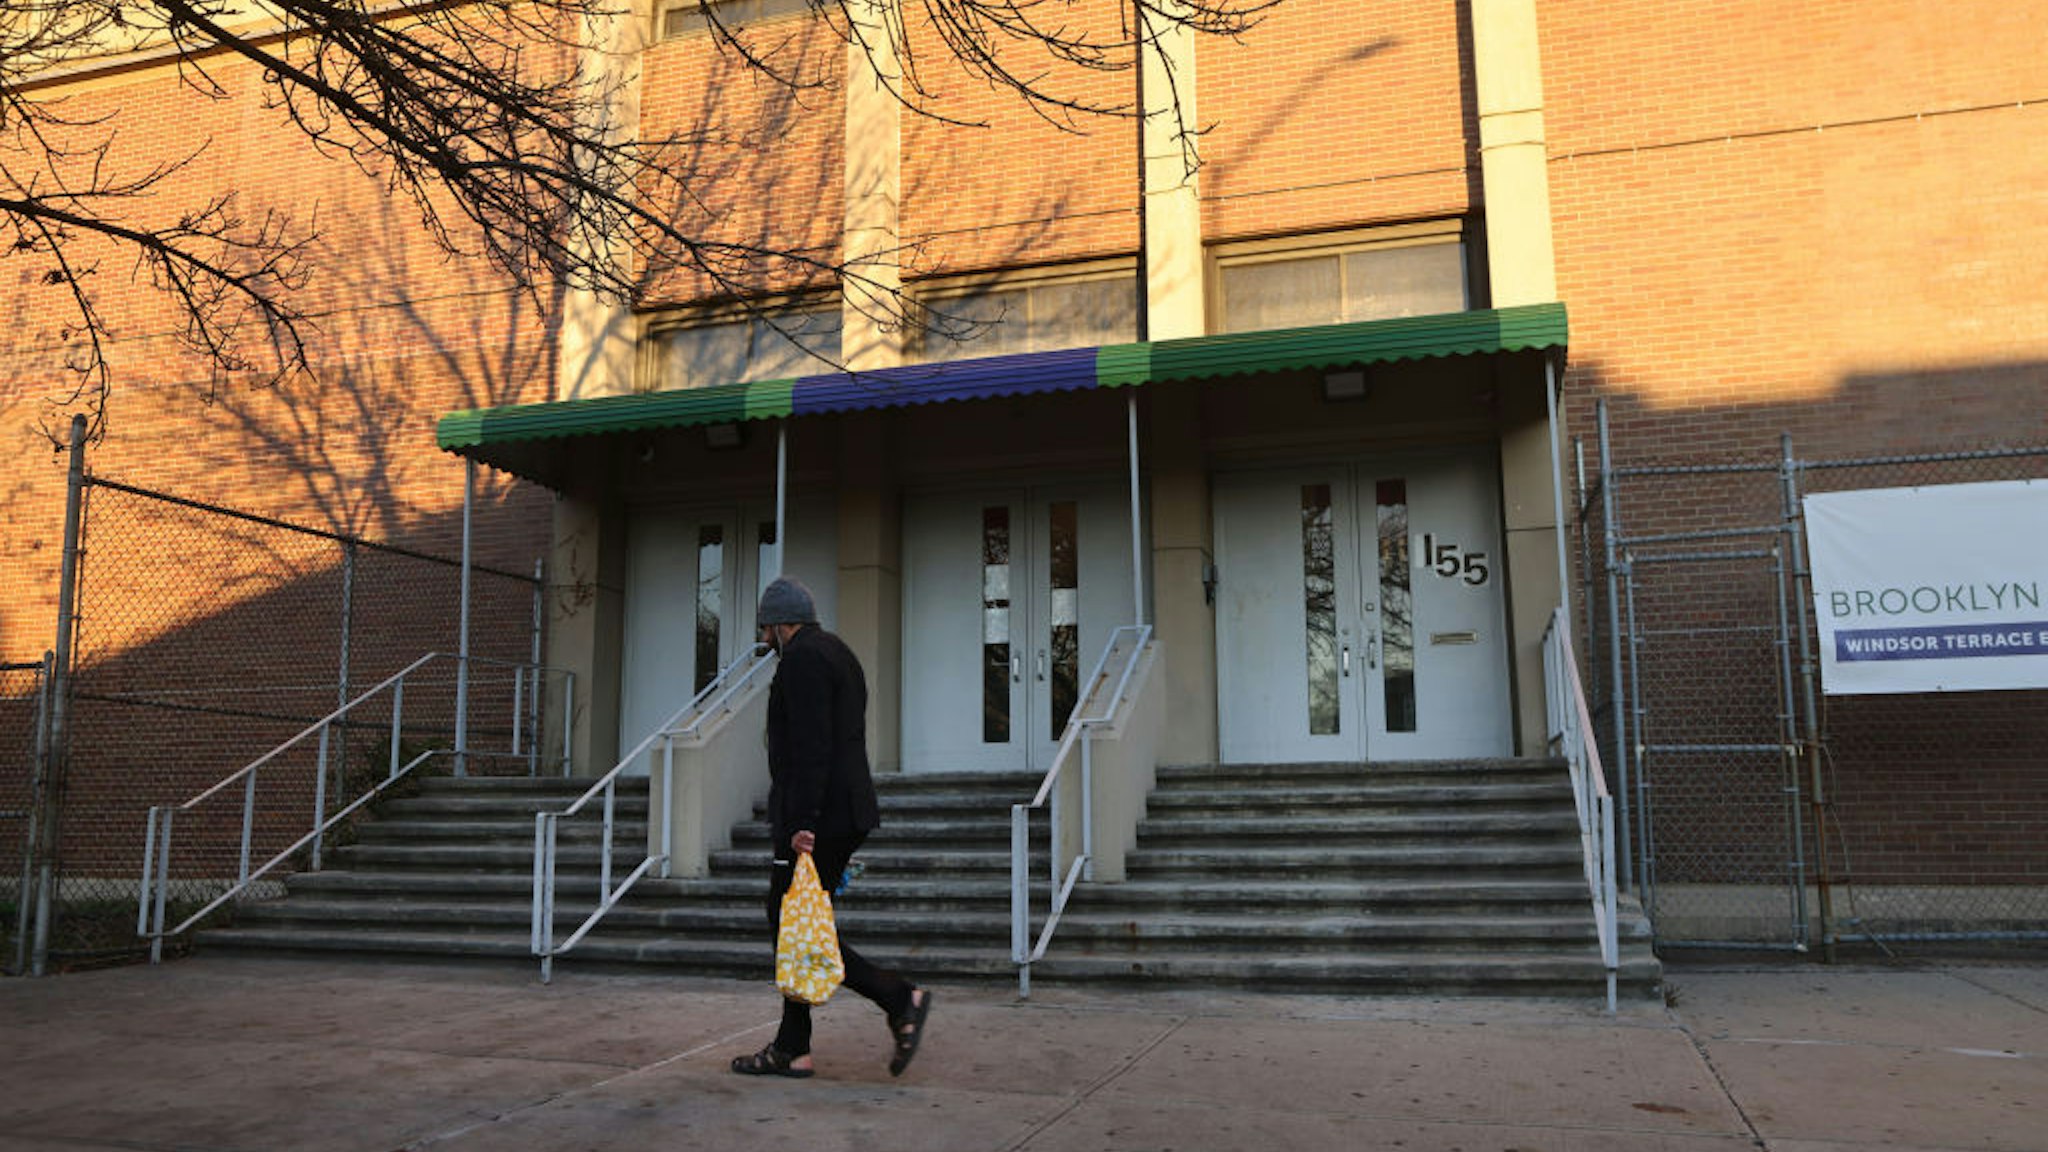 A person walks by a public school in Brooklyn on November 18, 2020 in New York City. Public schools in New York City, the largest school district in the nation, will close again on Thursday, officials have said after the city reached a 3% Covid test positivity rate.